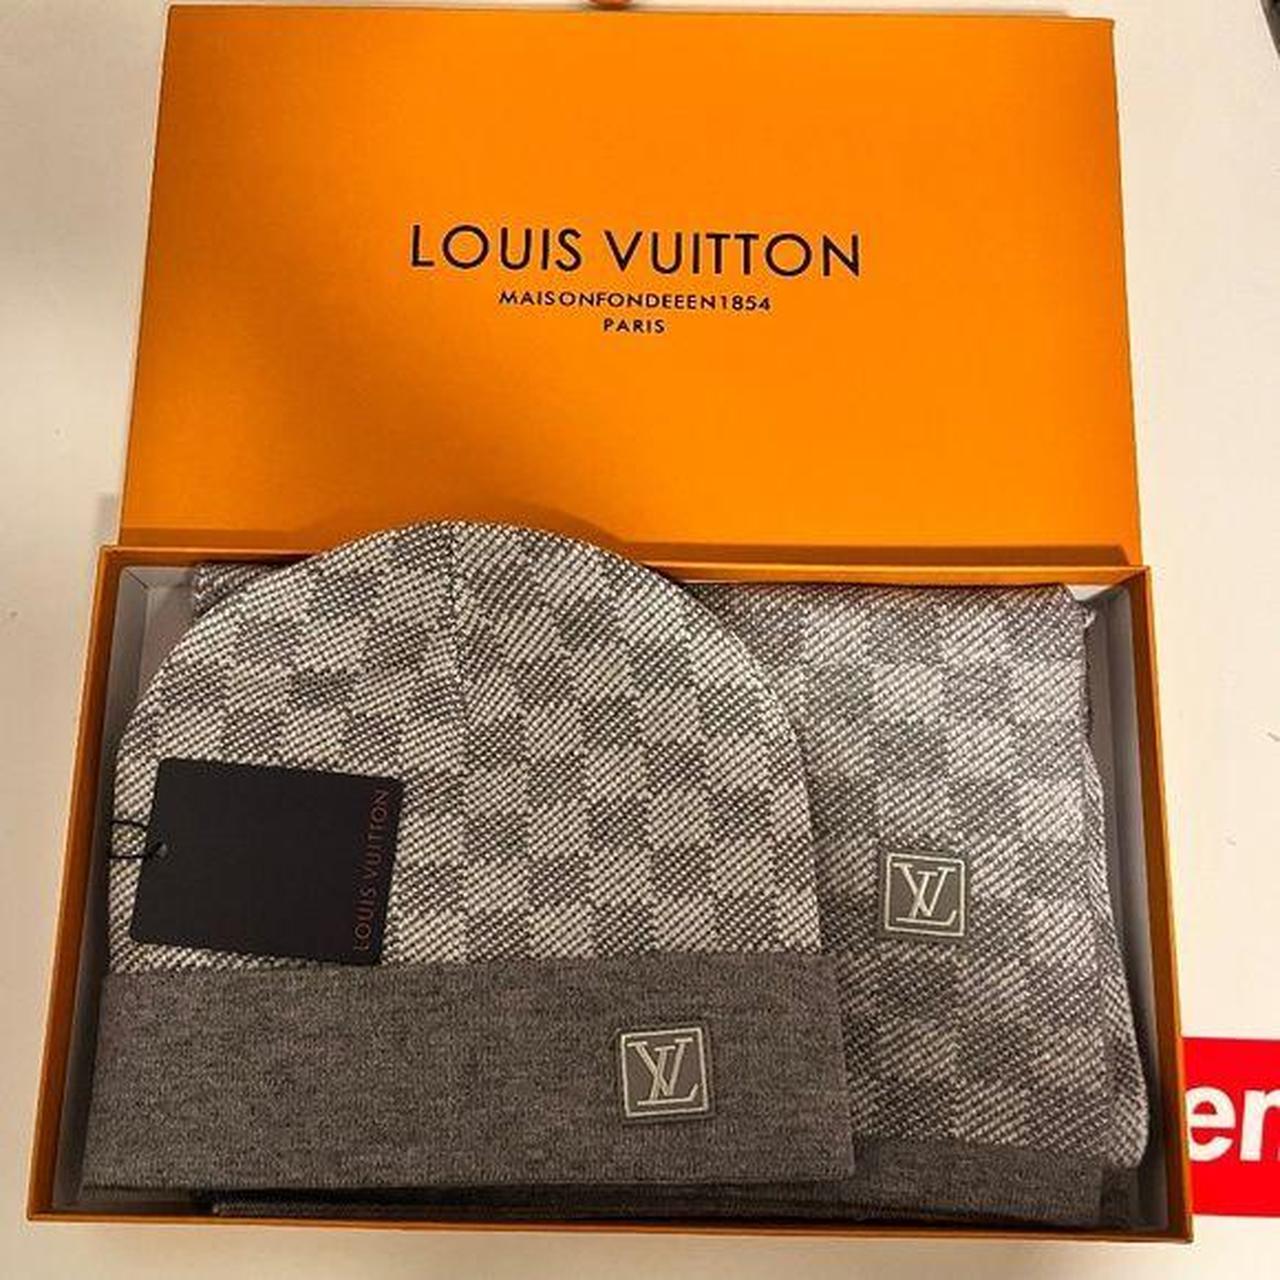 Lv set wore once Size S - Depop